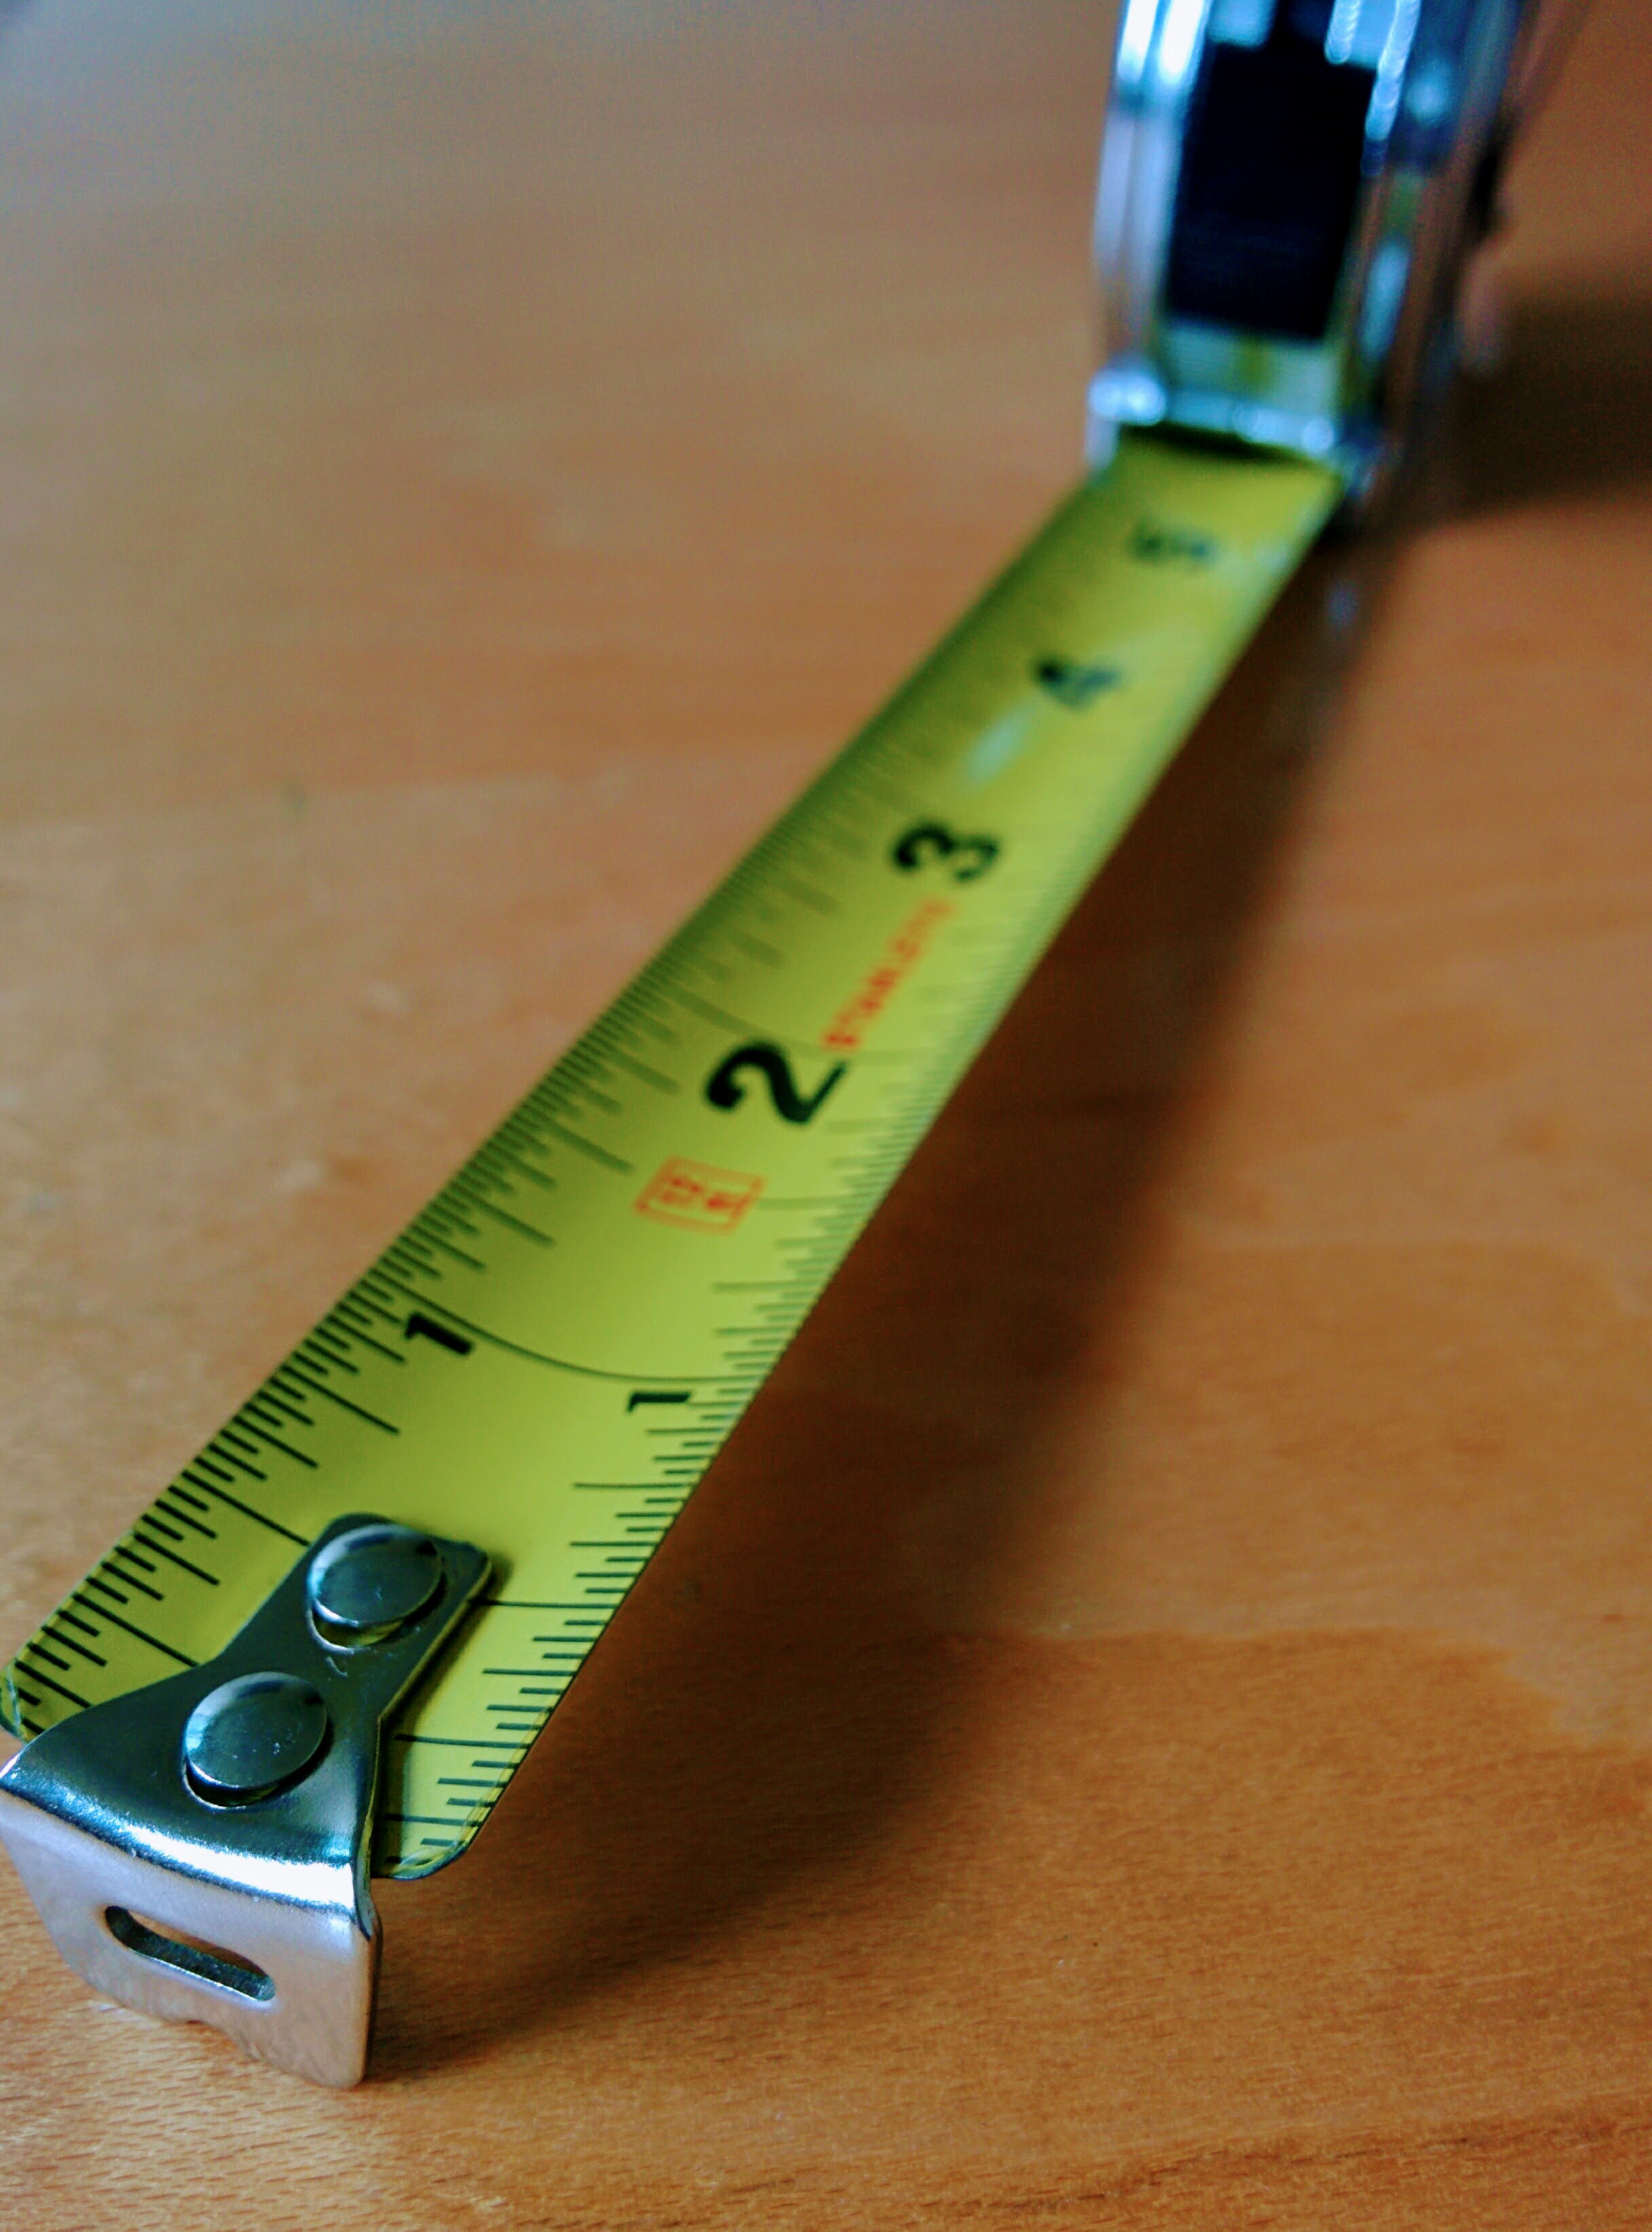 drywall-measuring-tape-overview